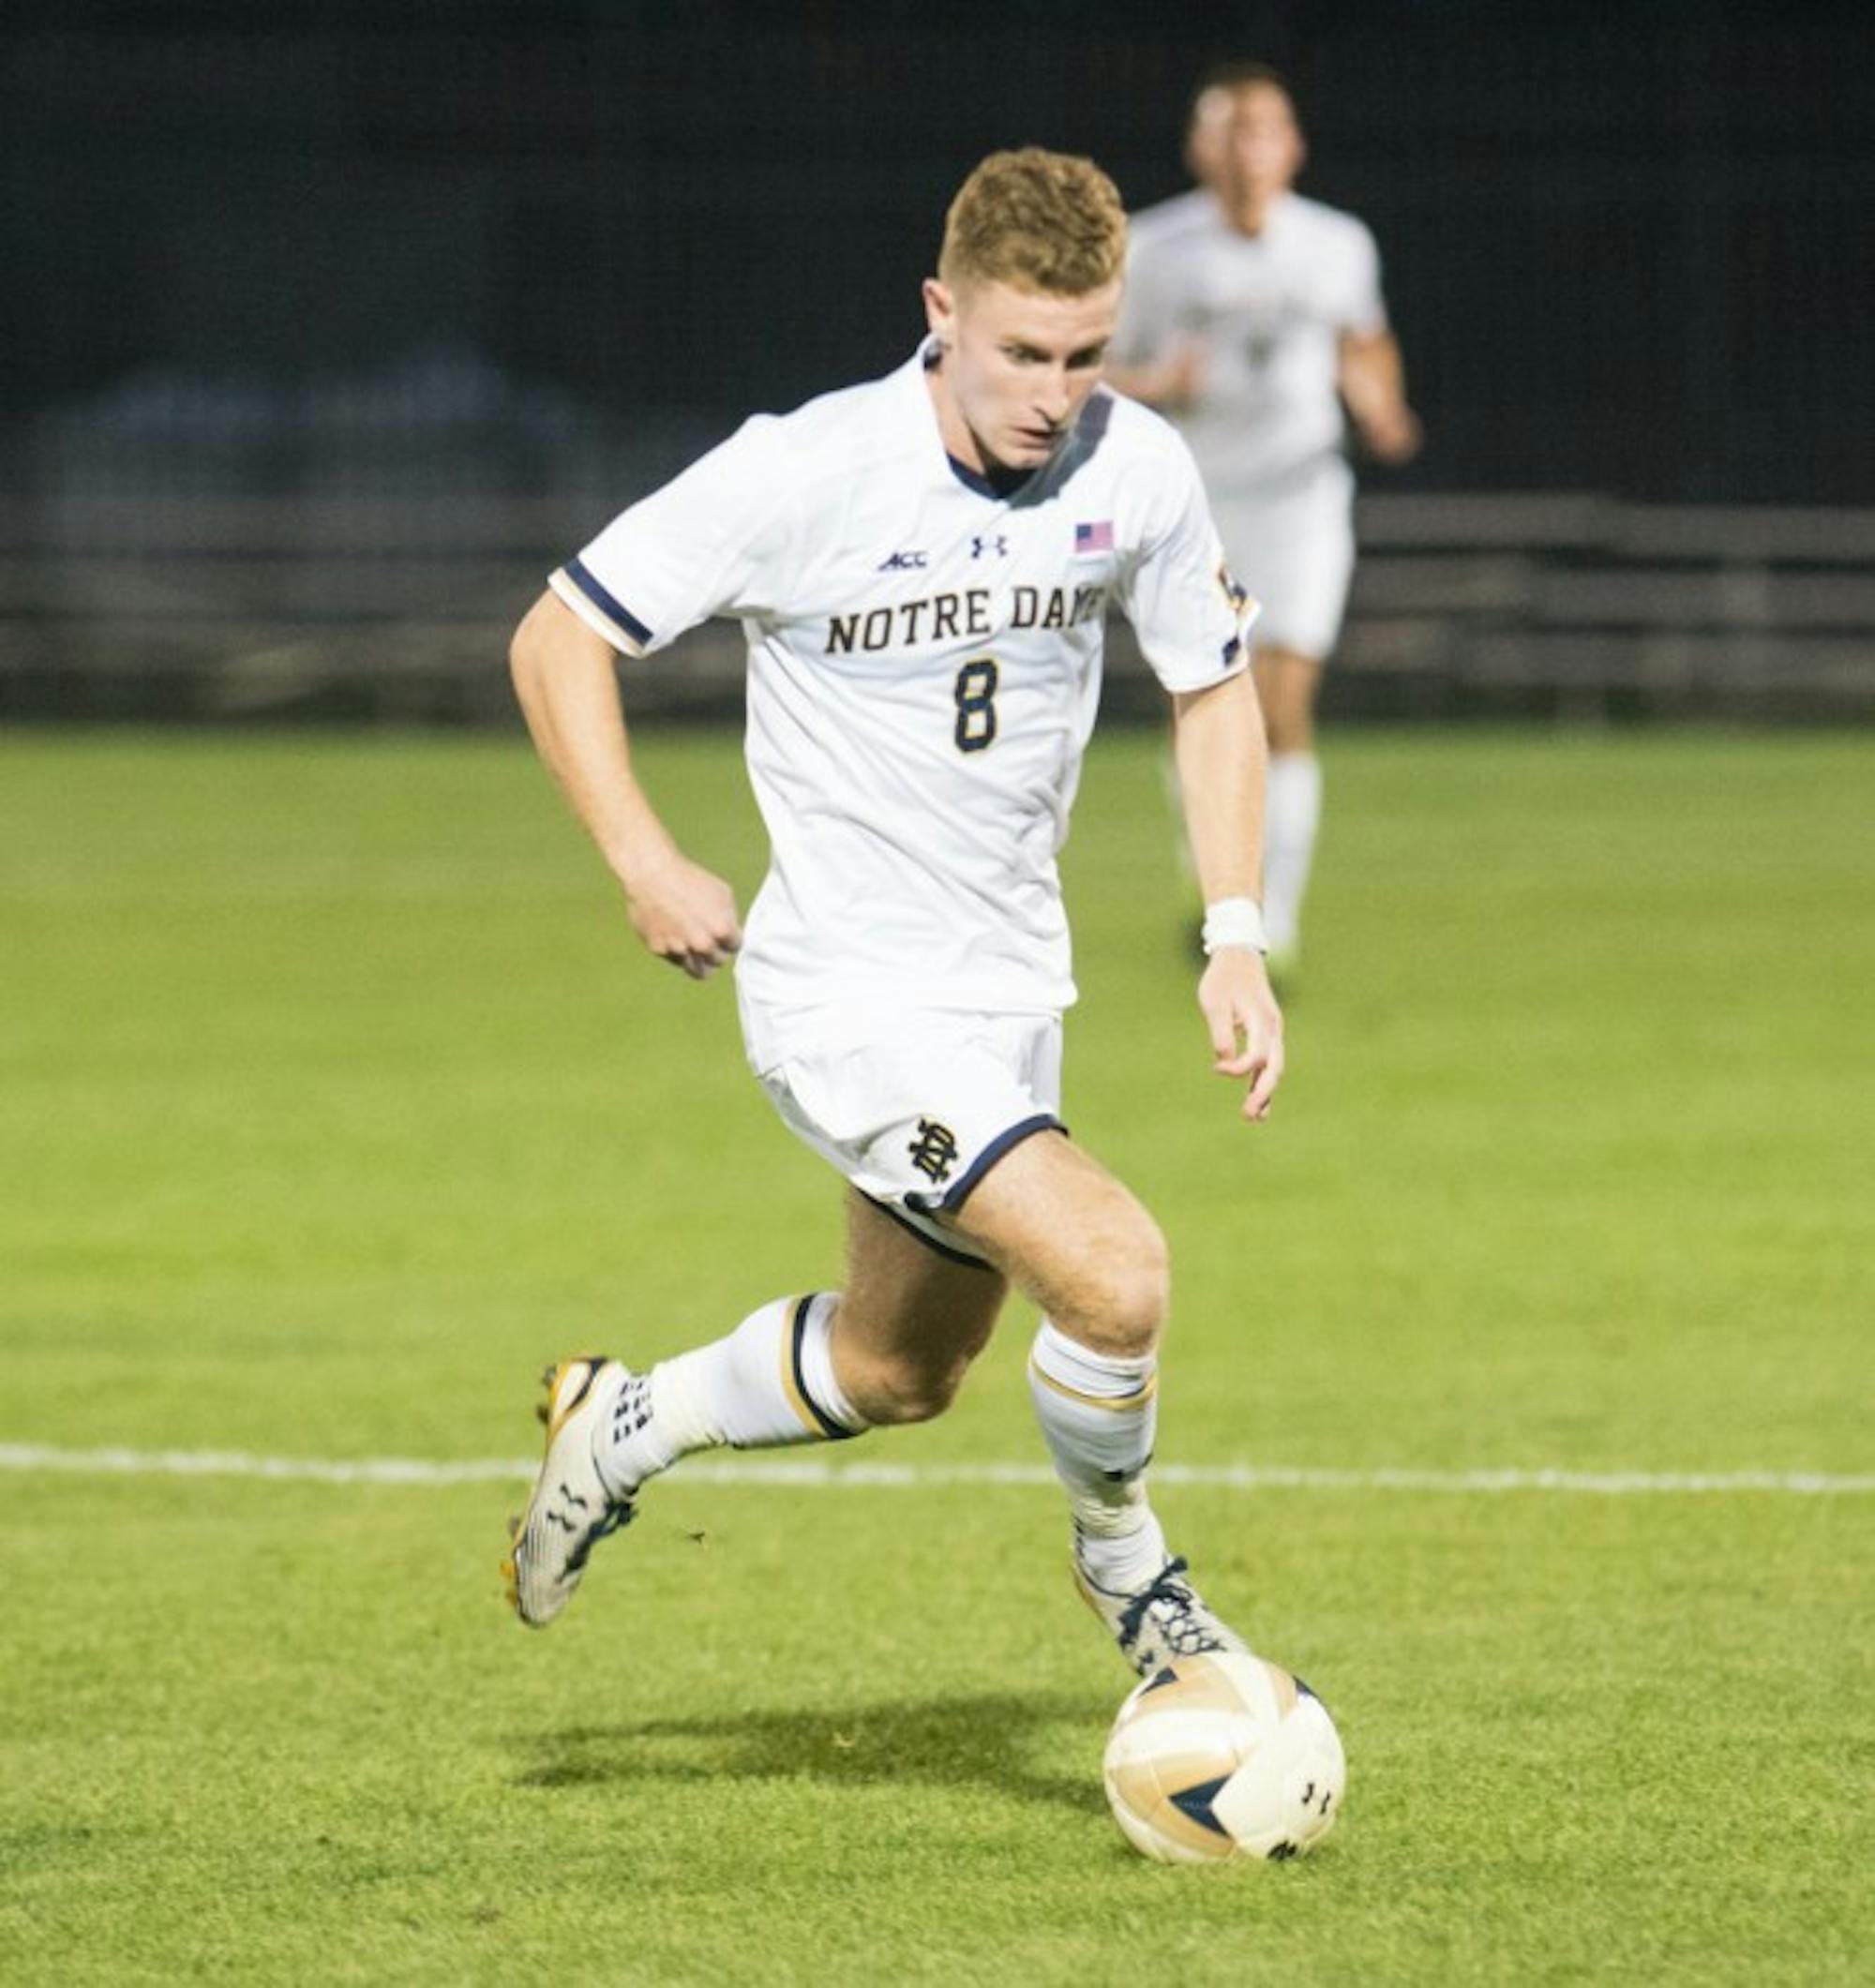 Irish junior forward Jon Gallagher maneuvers across the field in Notre Dame’s 1-0 win in double overtime over Connecticut on Tuesday at Alumni Stadium. Gallagher scored the game-winning goal against the Huskies in the second overtime period.